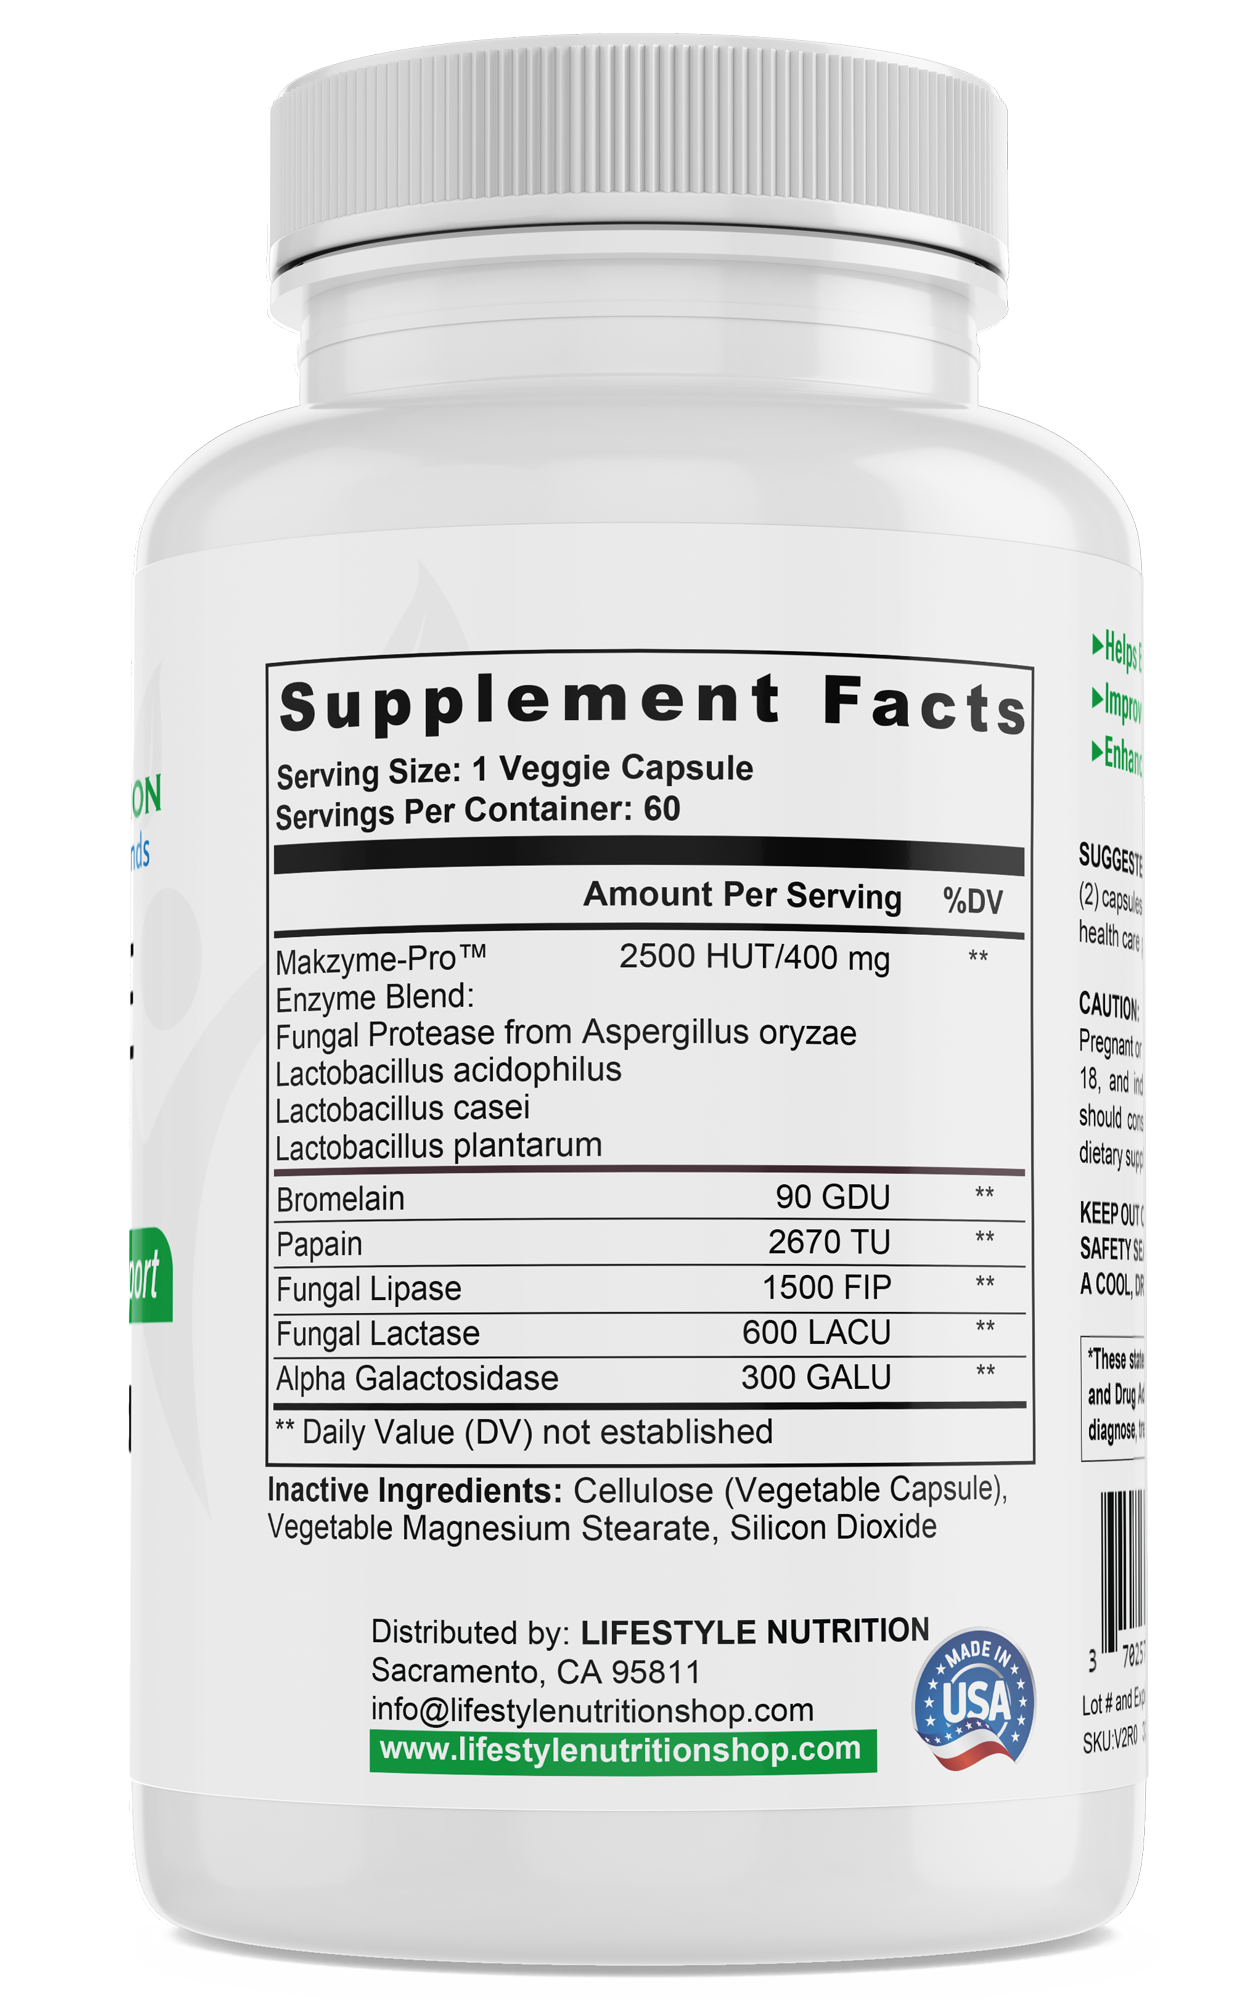 Digestive Enzyme Supplement Facts